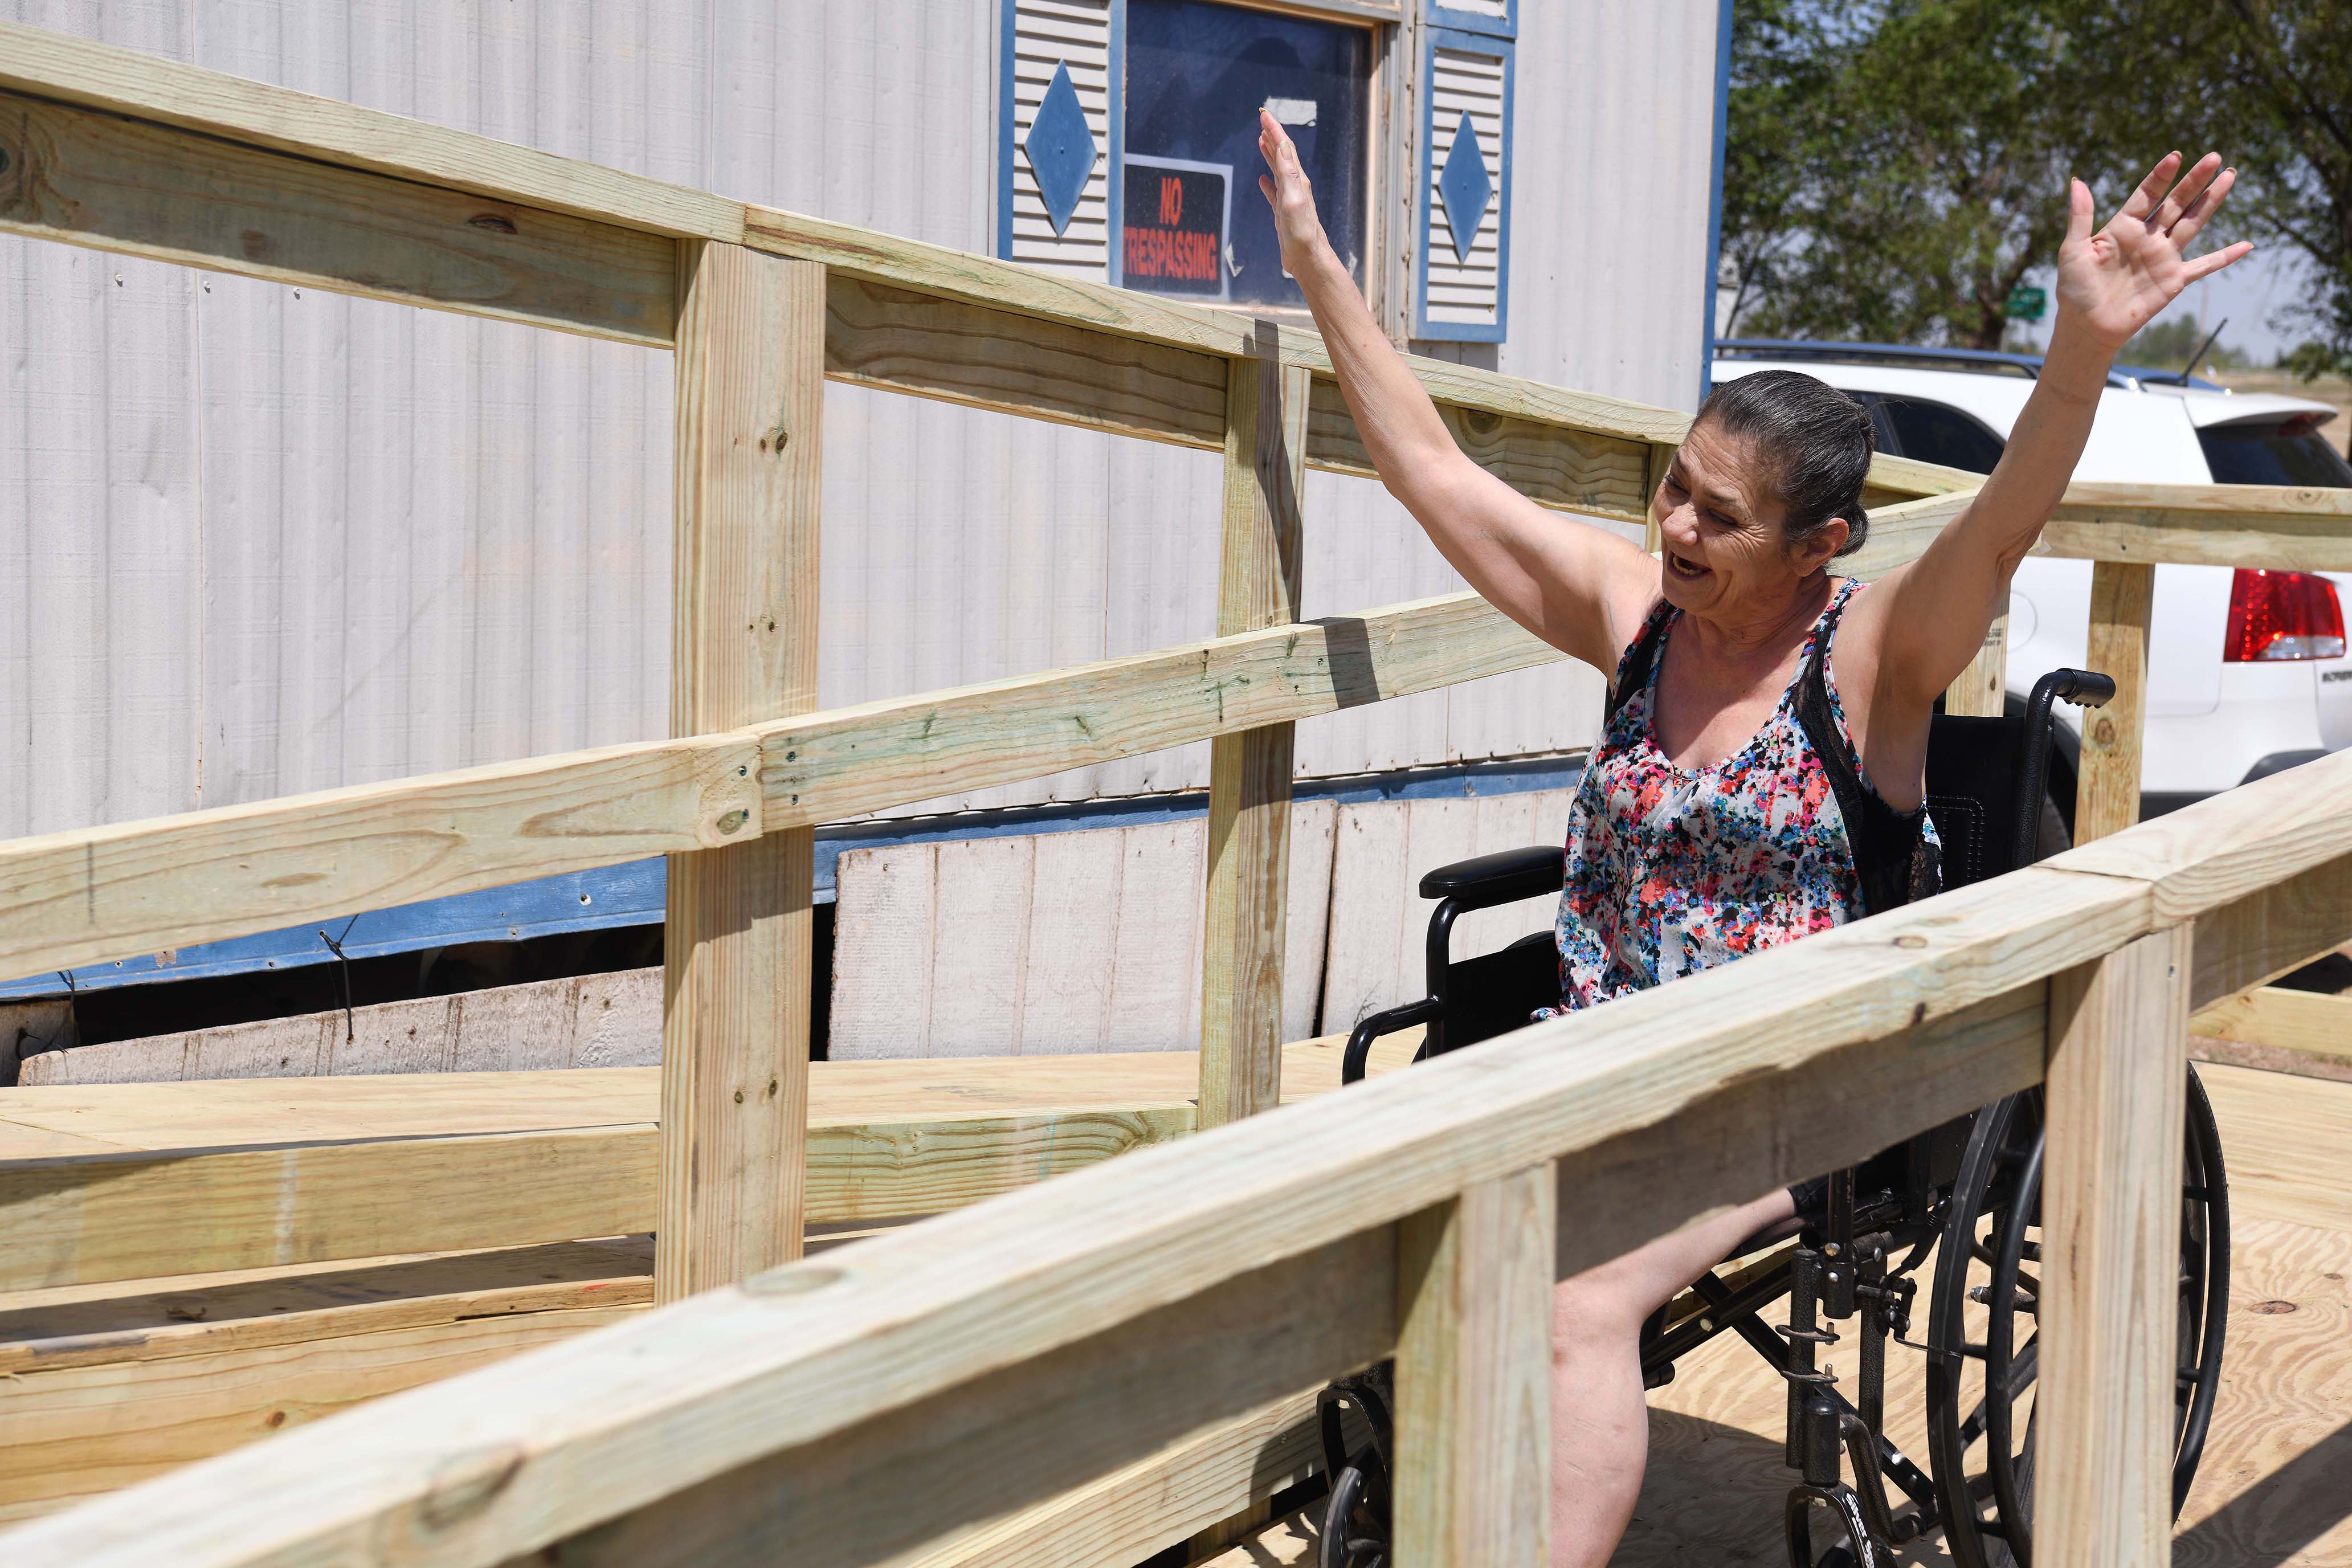 Pantex volunteers made a difference for four community members with ramps built for the Texas Ramp Project during the 2022 United Way Day of Caring